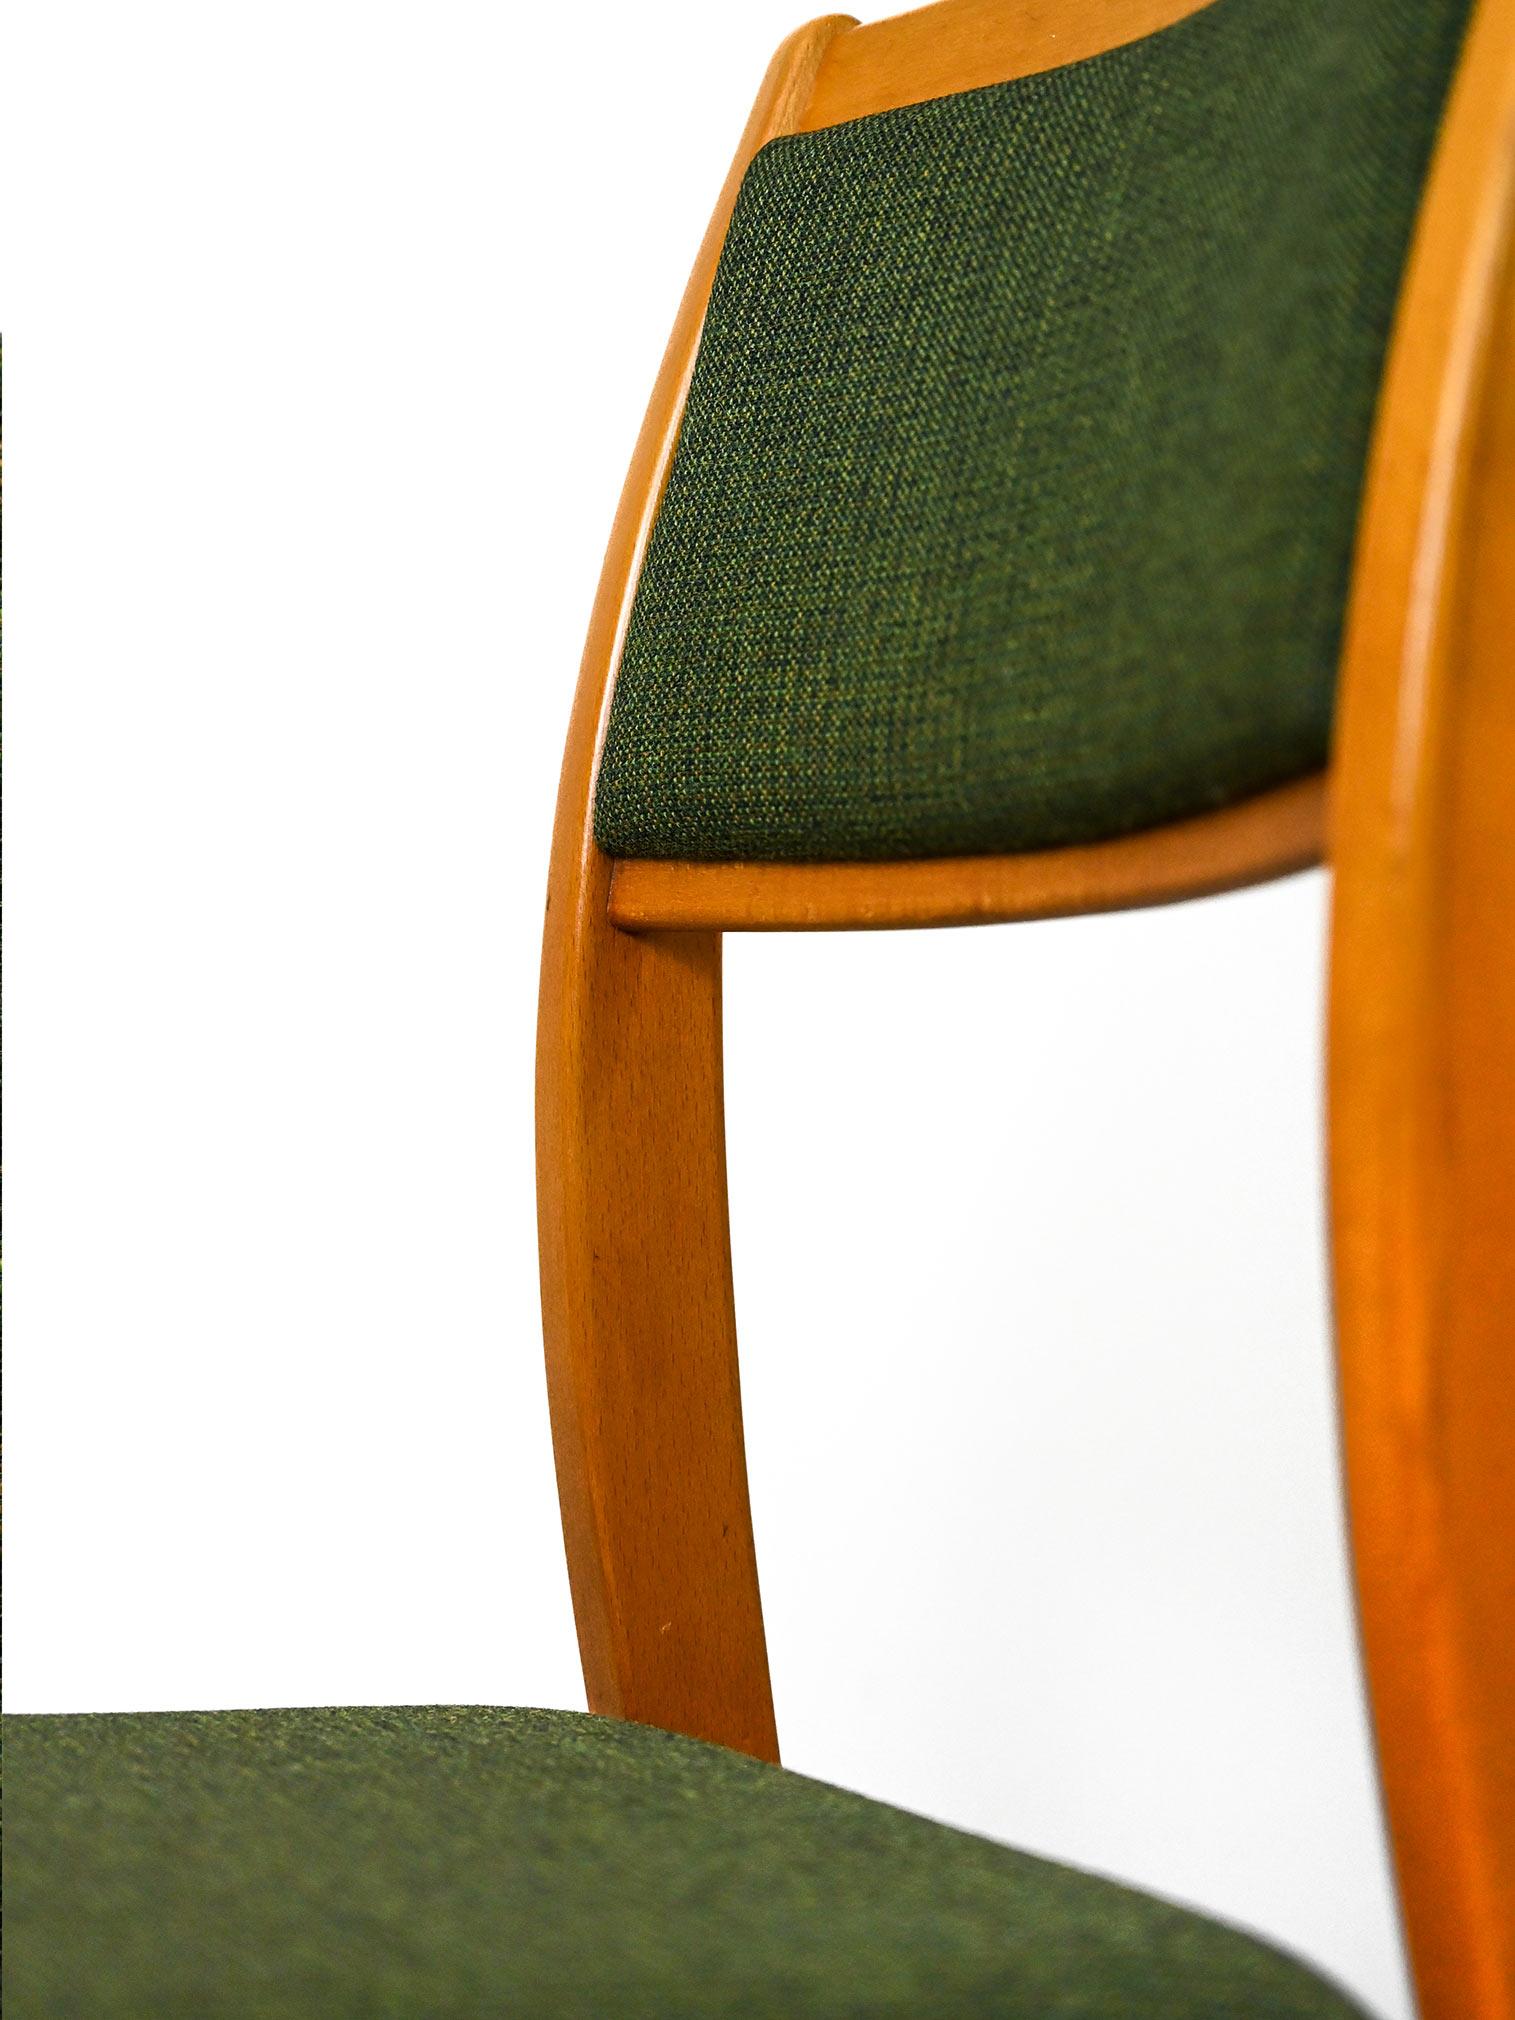 1960s Chairs with Green Fabric 1